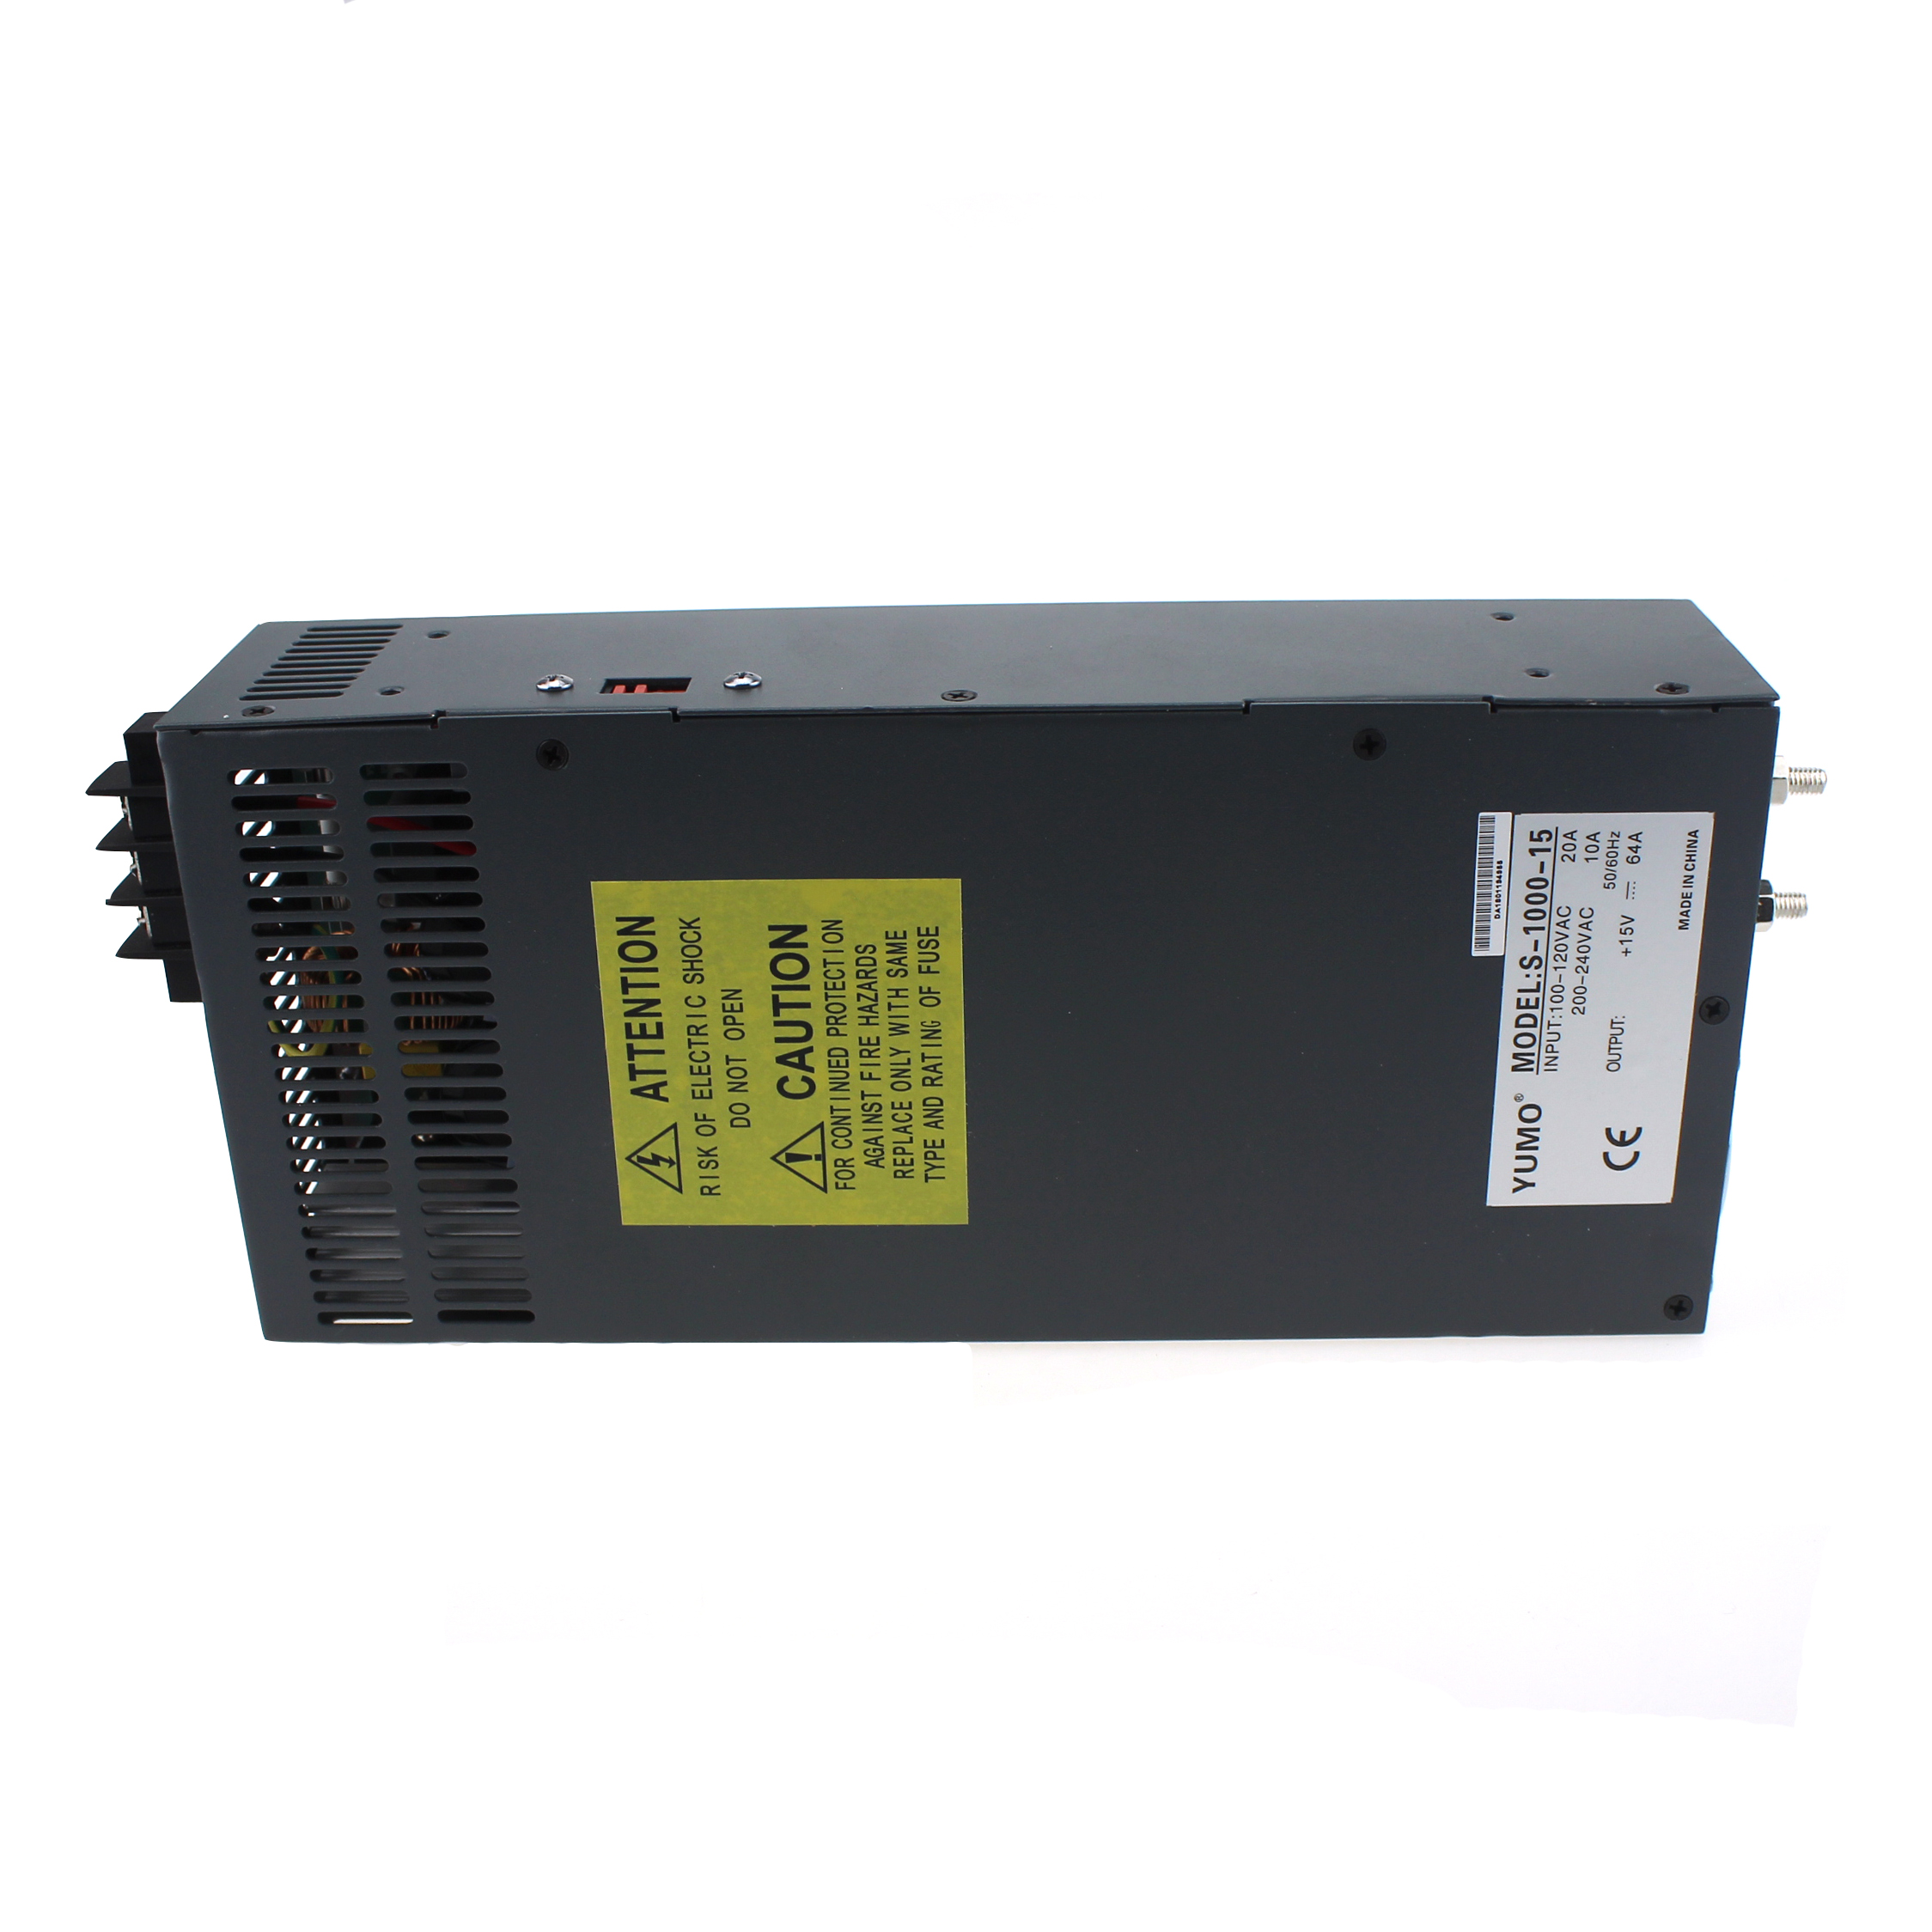 S-1000-15 High Quality 1000W 15VDC SMPS Switching Power Supply